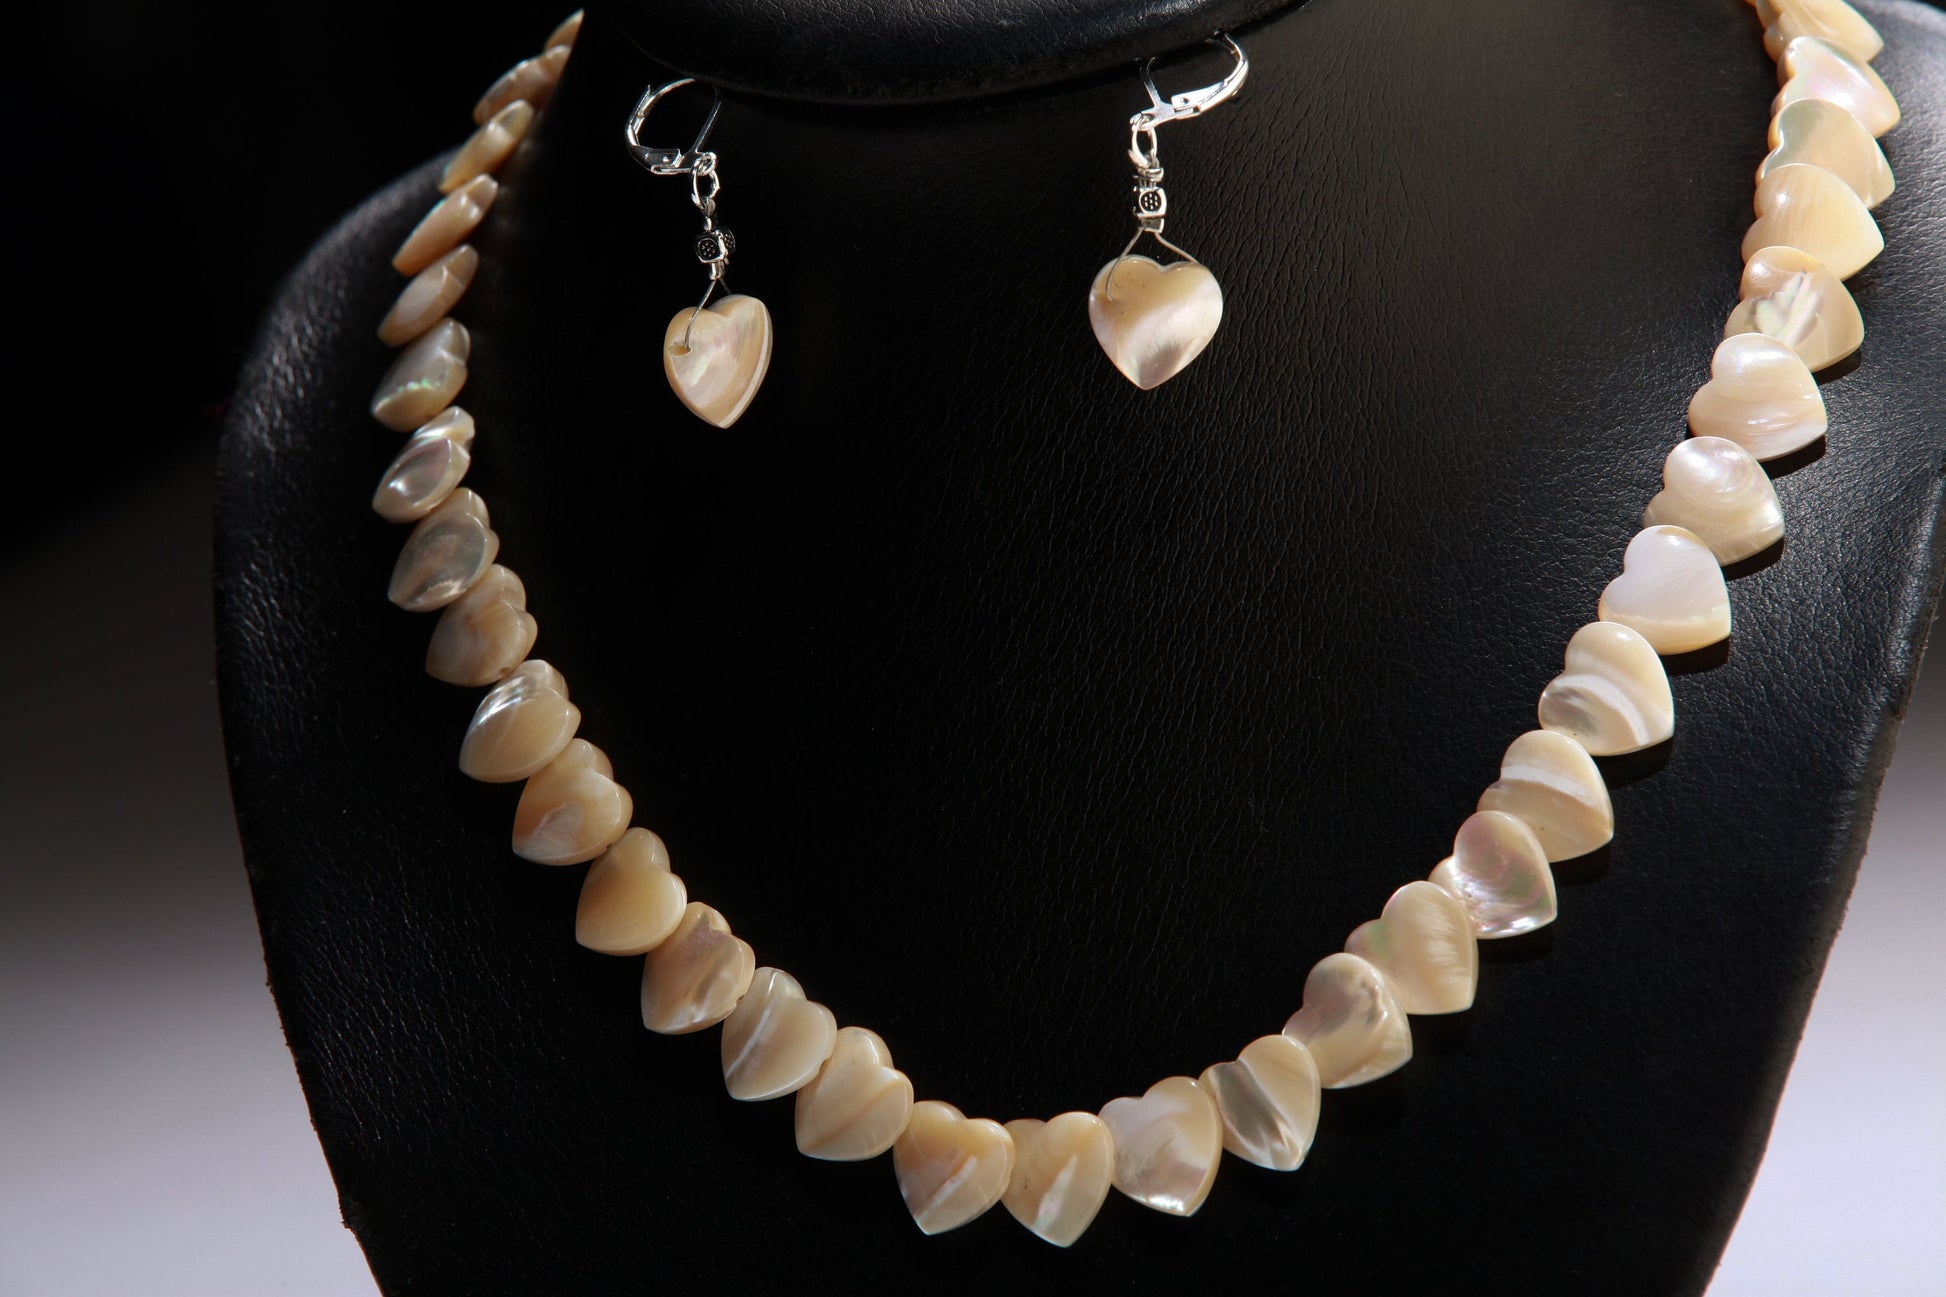 Mother of Pearl Heart Necklace, Earrings set, Natural MOP Mother of Pearl 13mm Puffed Overlap Heart Seashell Necklace Earrings Jewelry Set